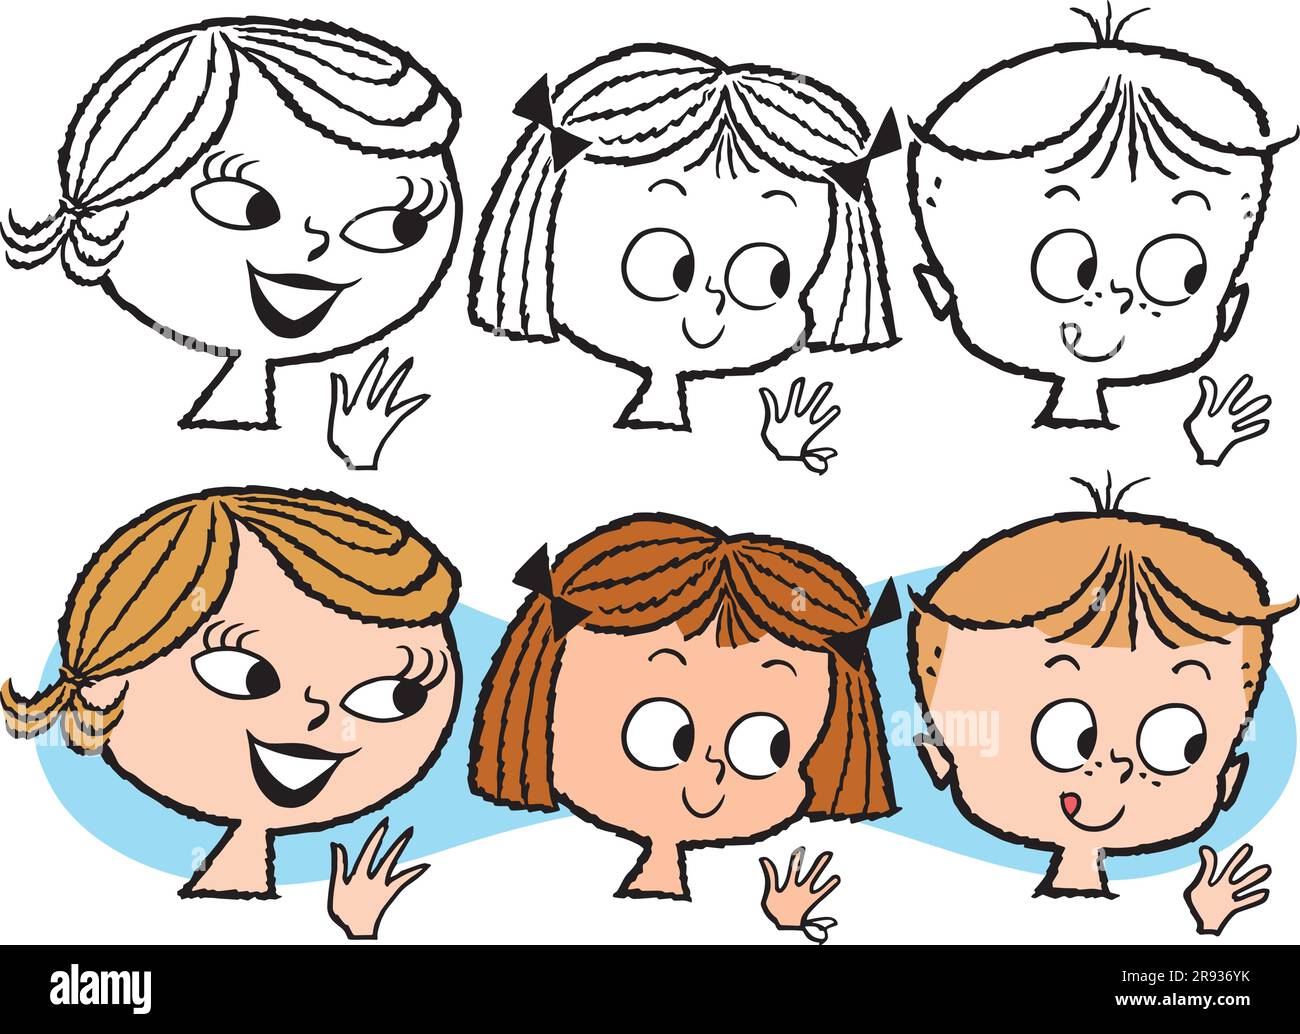 A vintage retro cartoon of the heads of a mother and her two children. Stock Vector